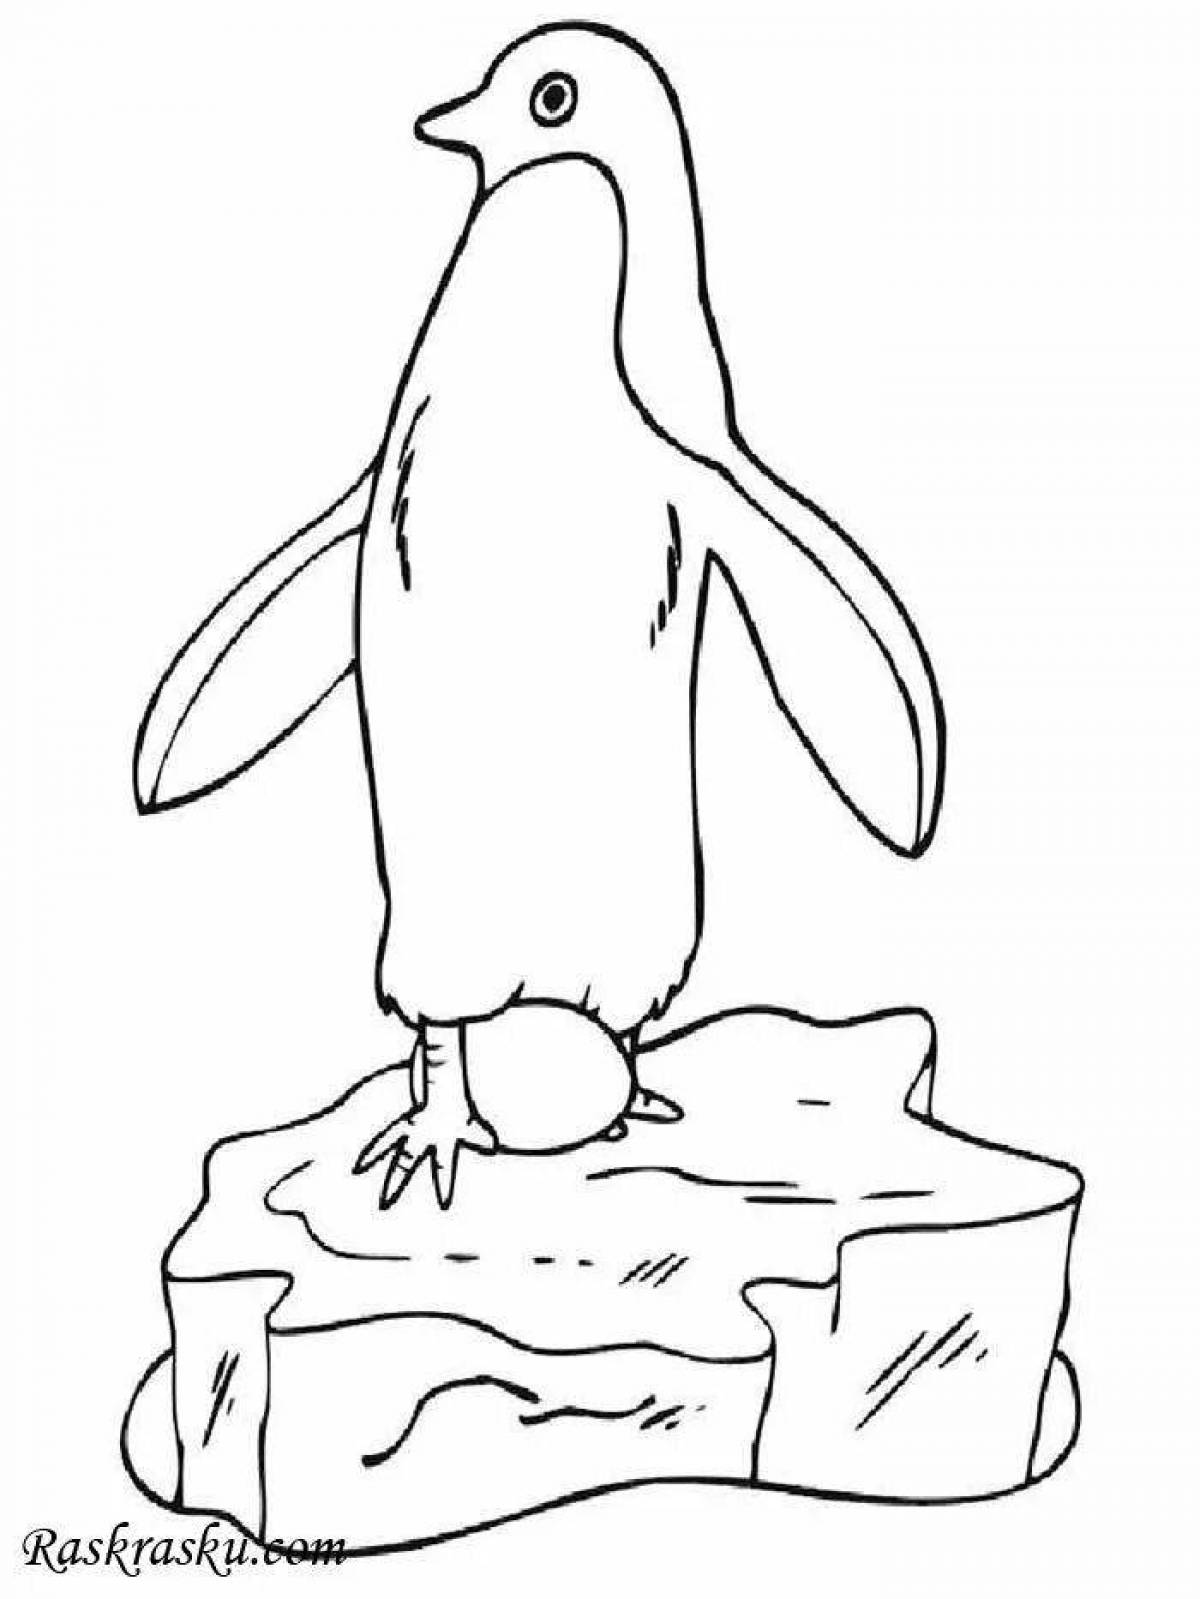 Coloring page cute penguin on ice